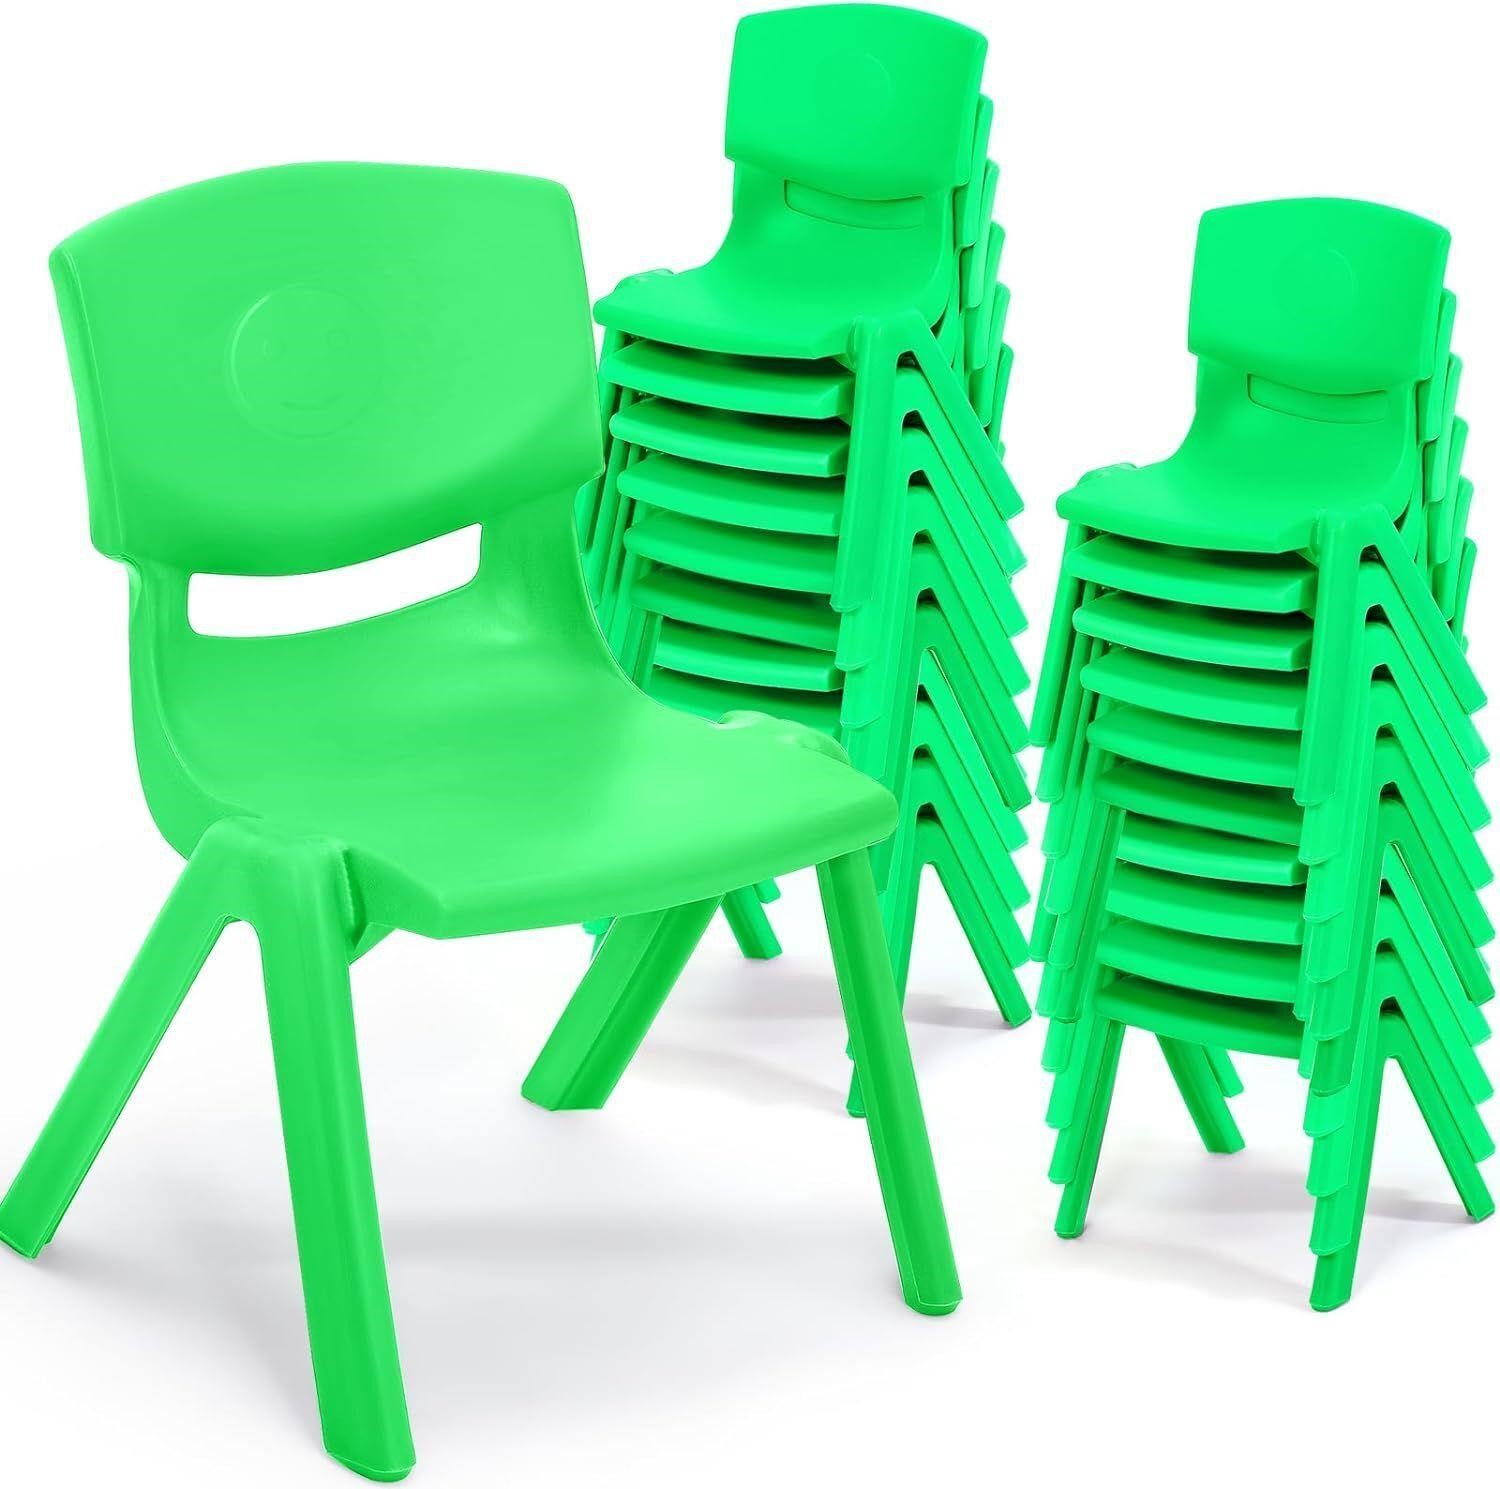 20 Pcs Stackable Green Plastic School Chairs